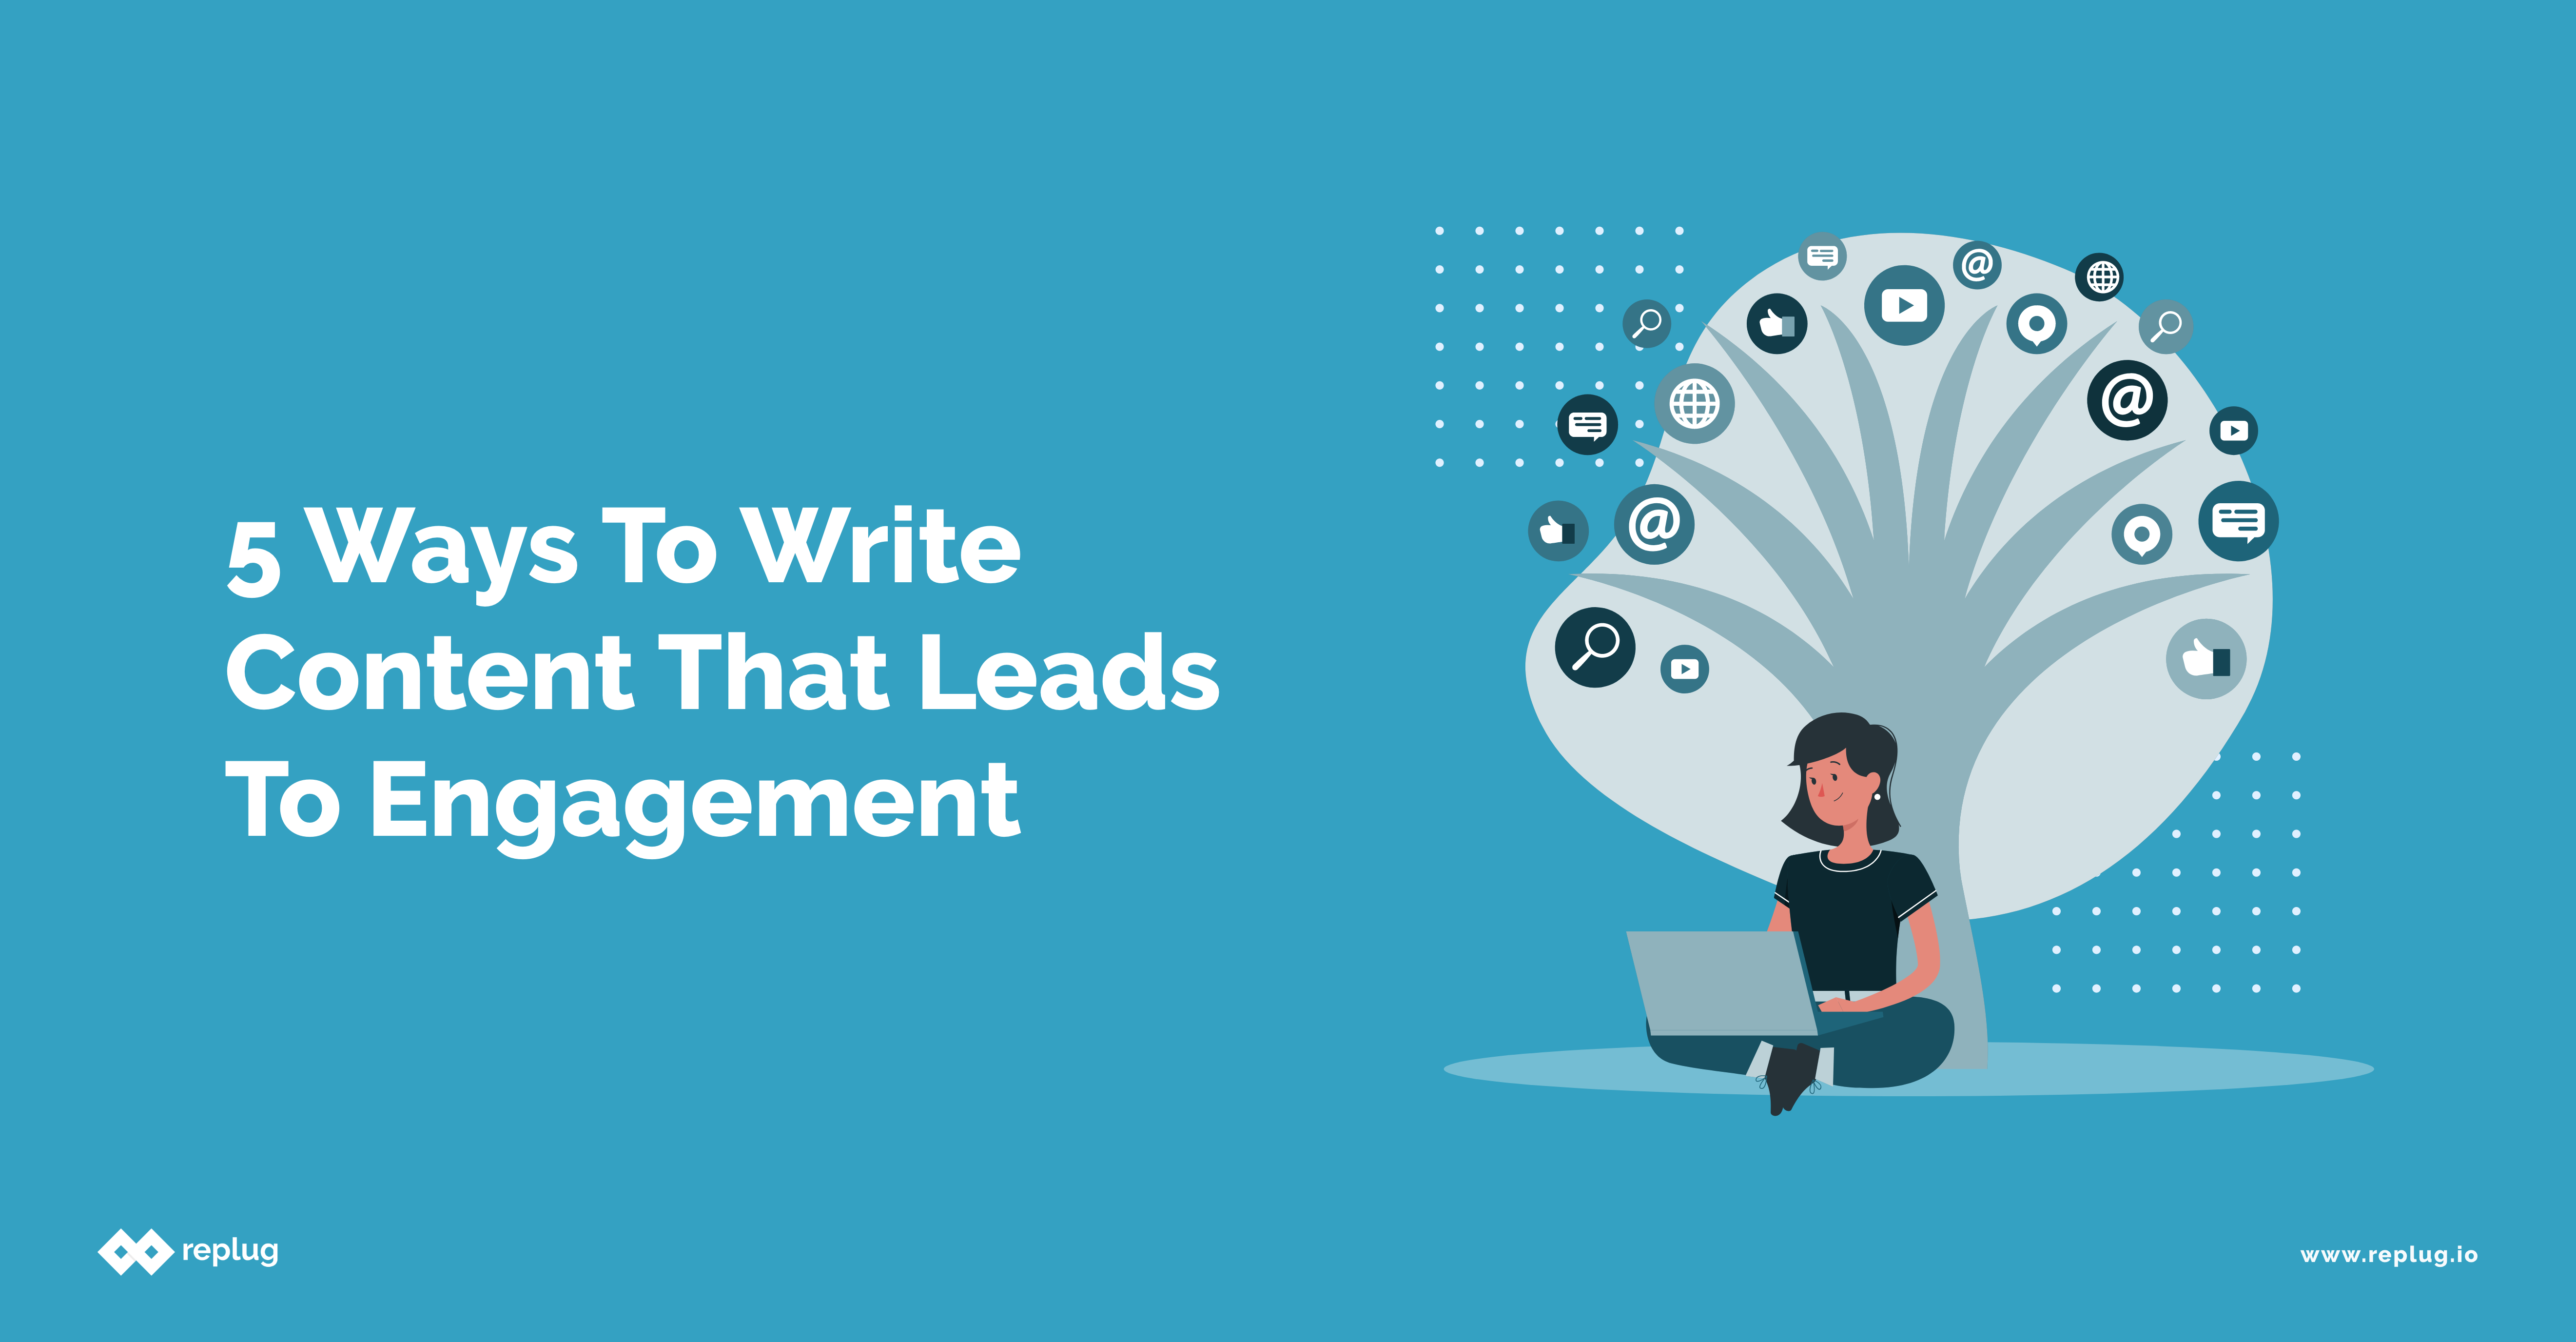 5 Ways to Write Content that Leads to Engagement